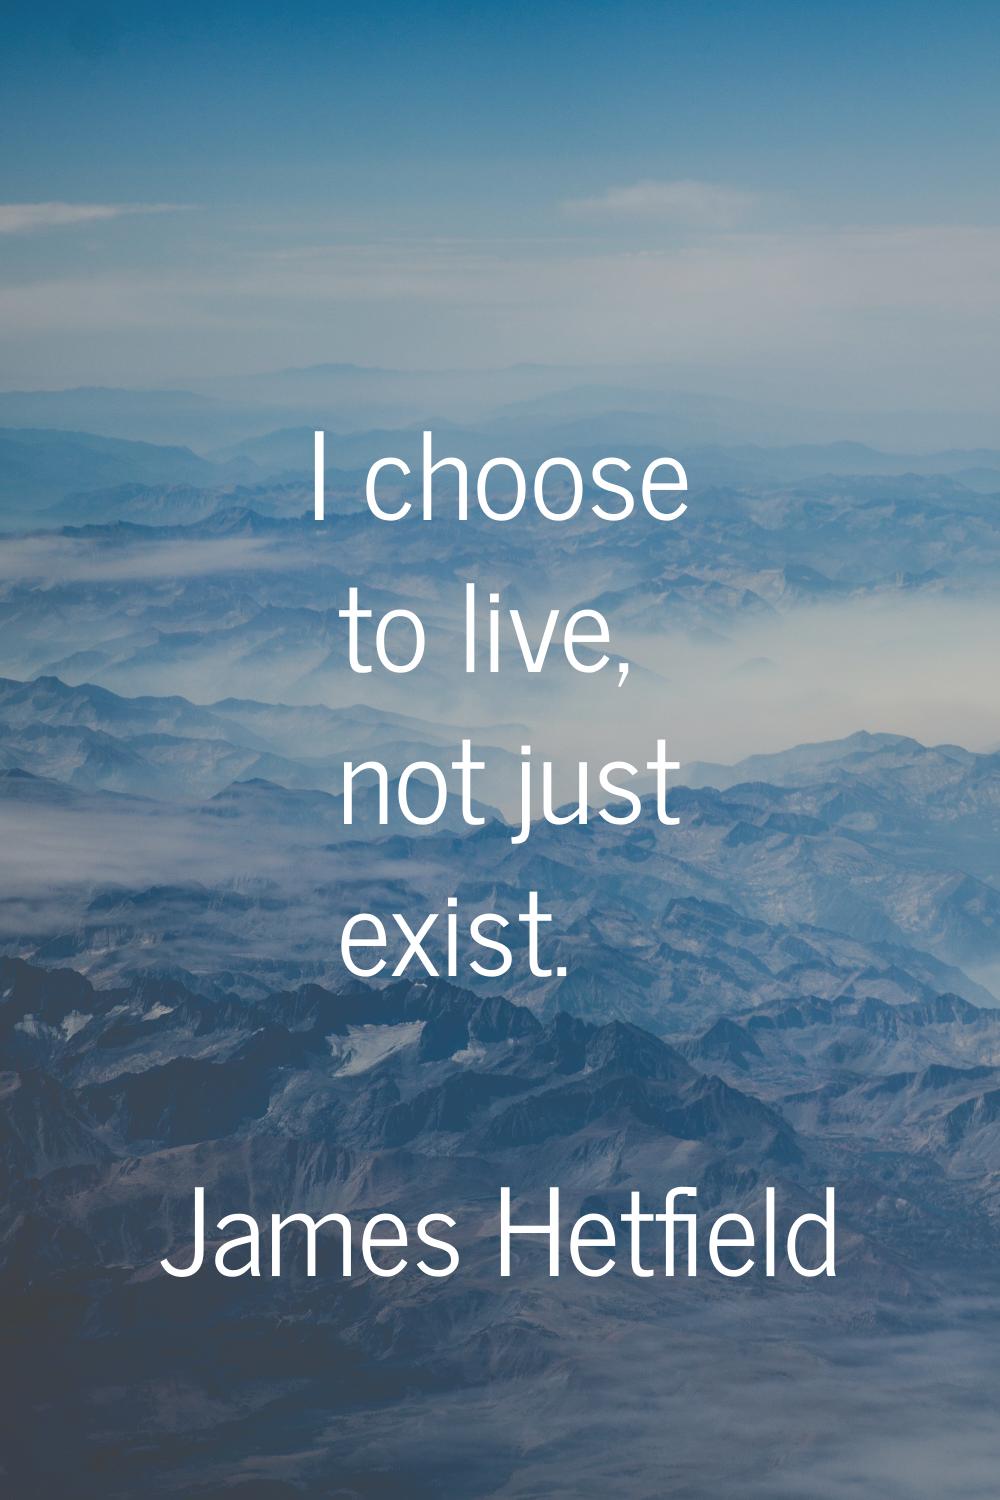 I choose to live, not just exist.